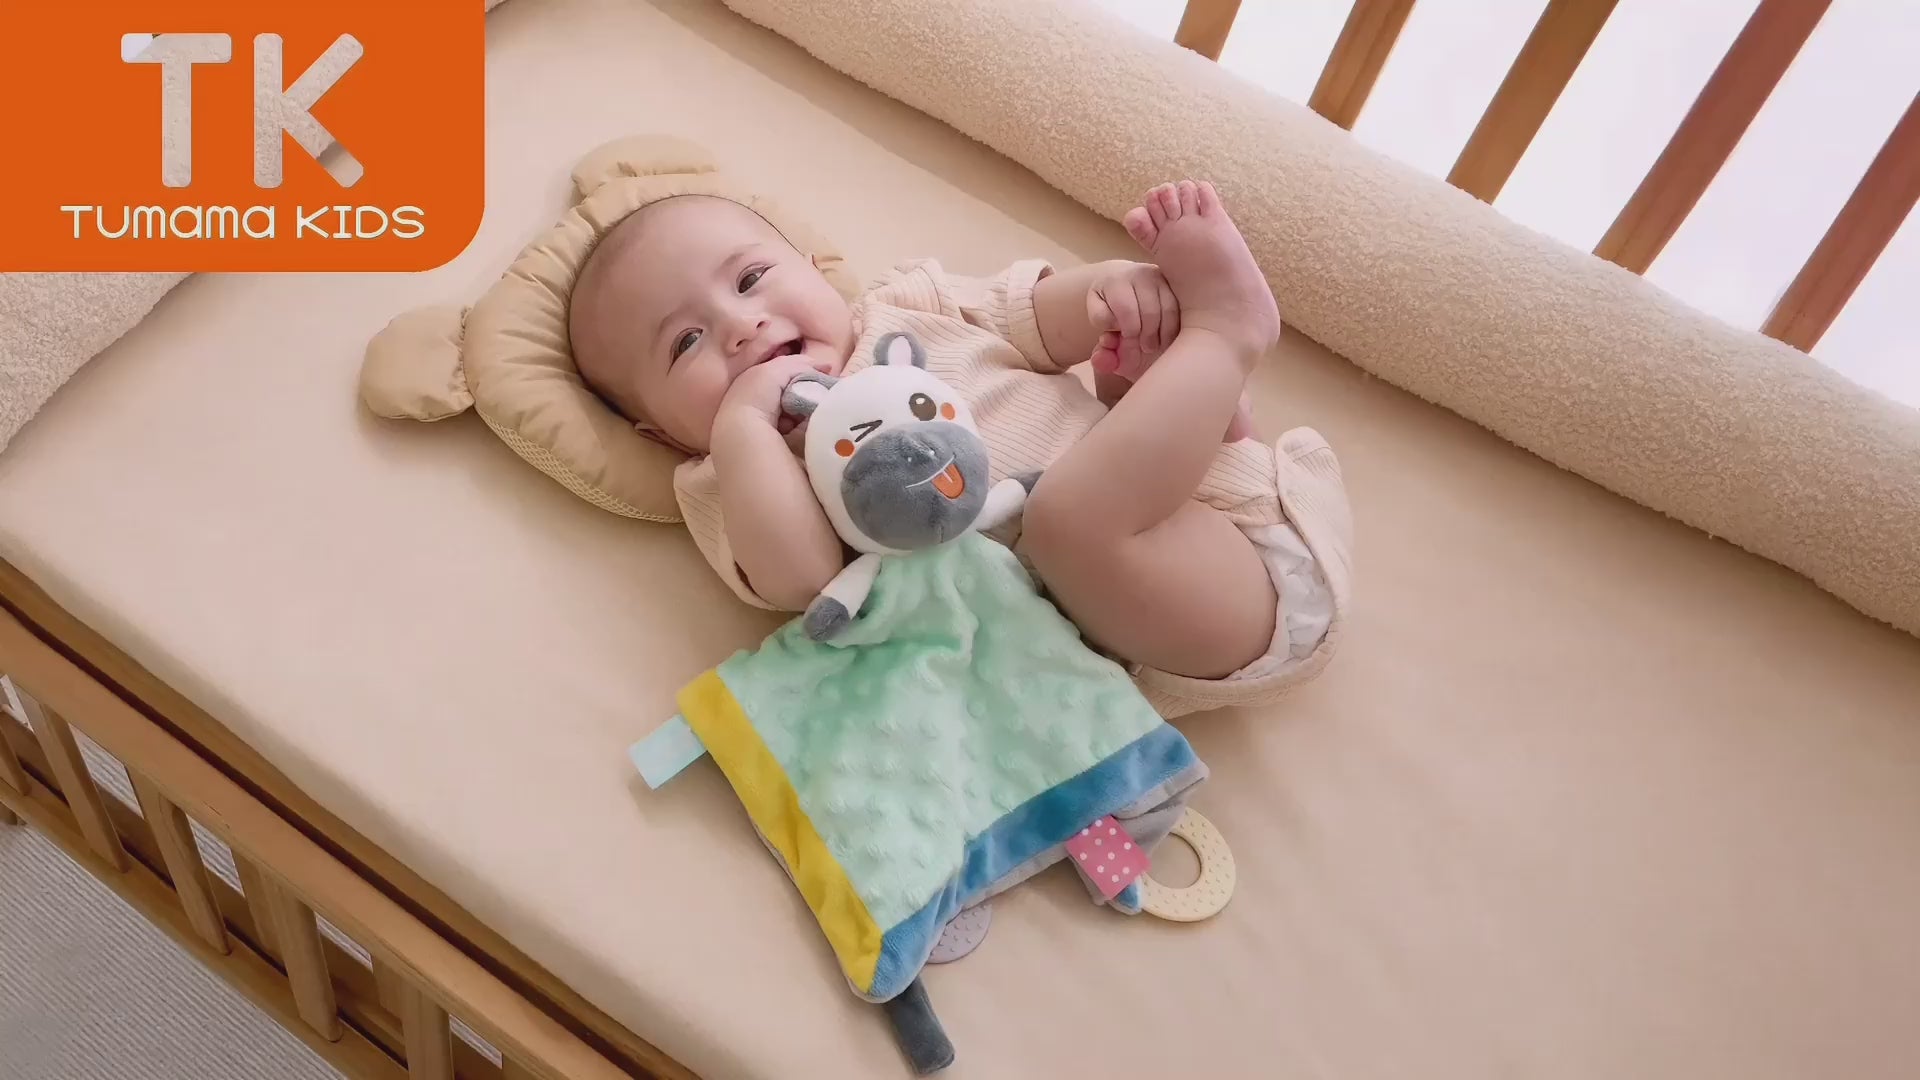 Mommy-uses-this-comfort-blanket-to-play-with-her-baby-and-wipe-his-saliva